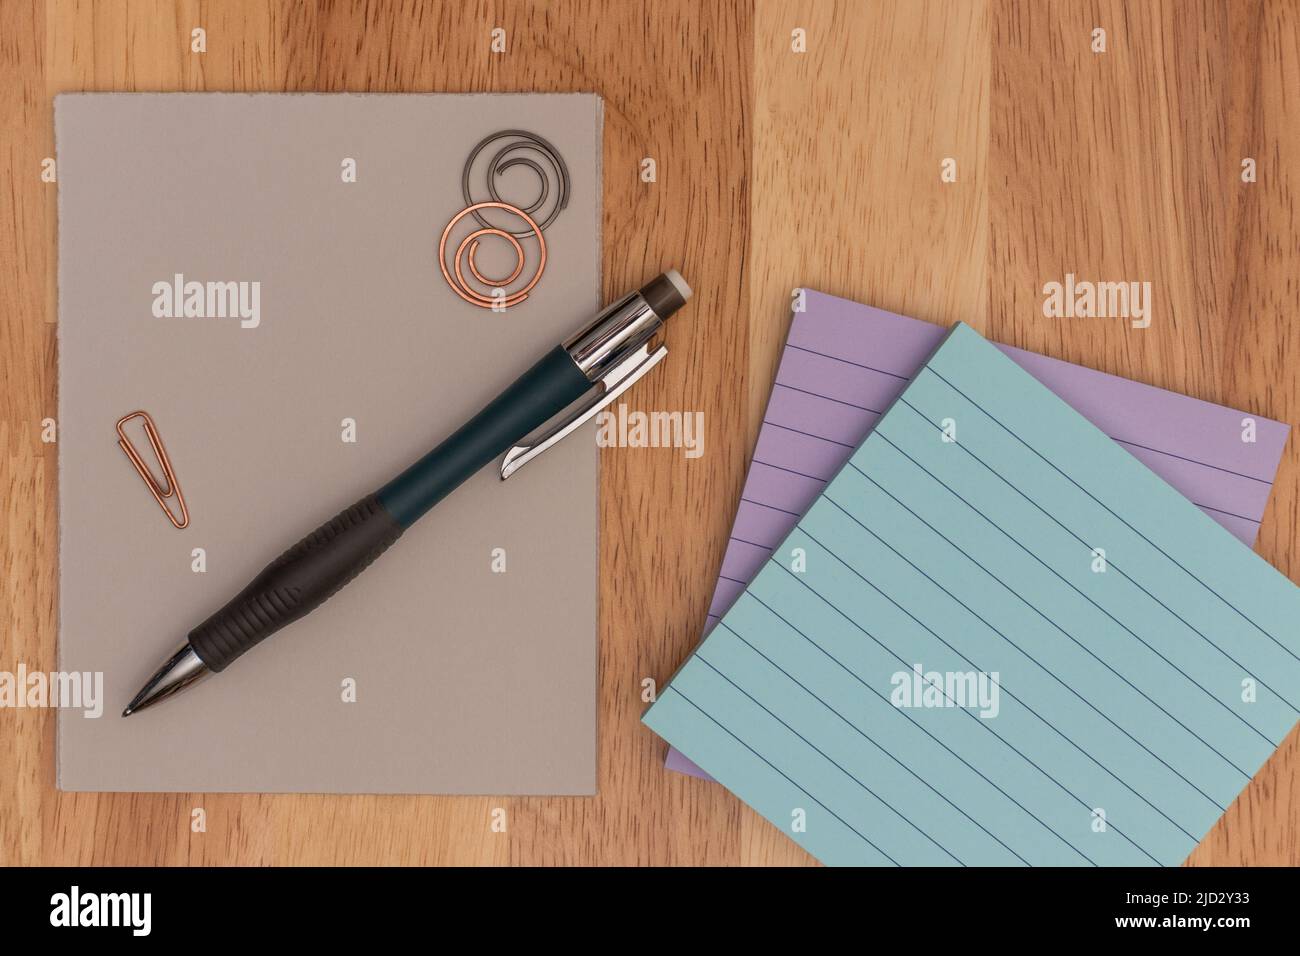 Administrative Professionals Day, Secretaries Day concept showing pencil, paper clips, and sticky notes on wooden surface Stock Photo